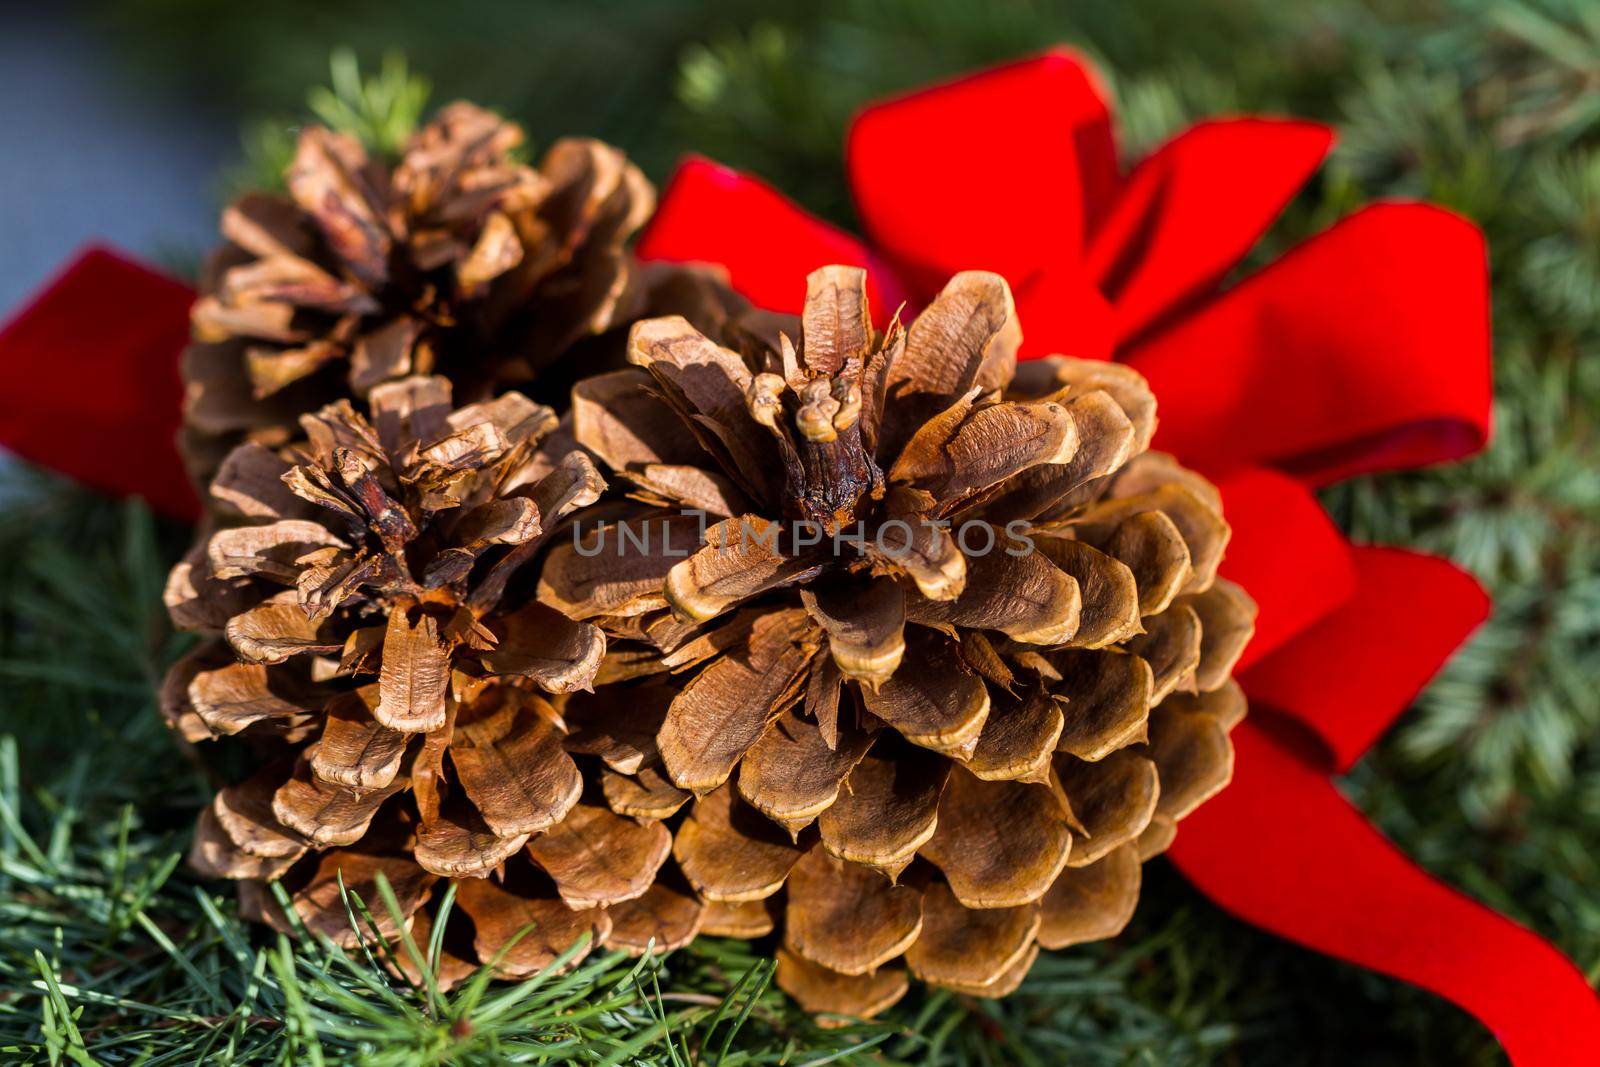 Pine cones on evergreen branches.